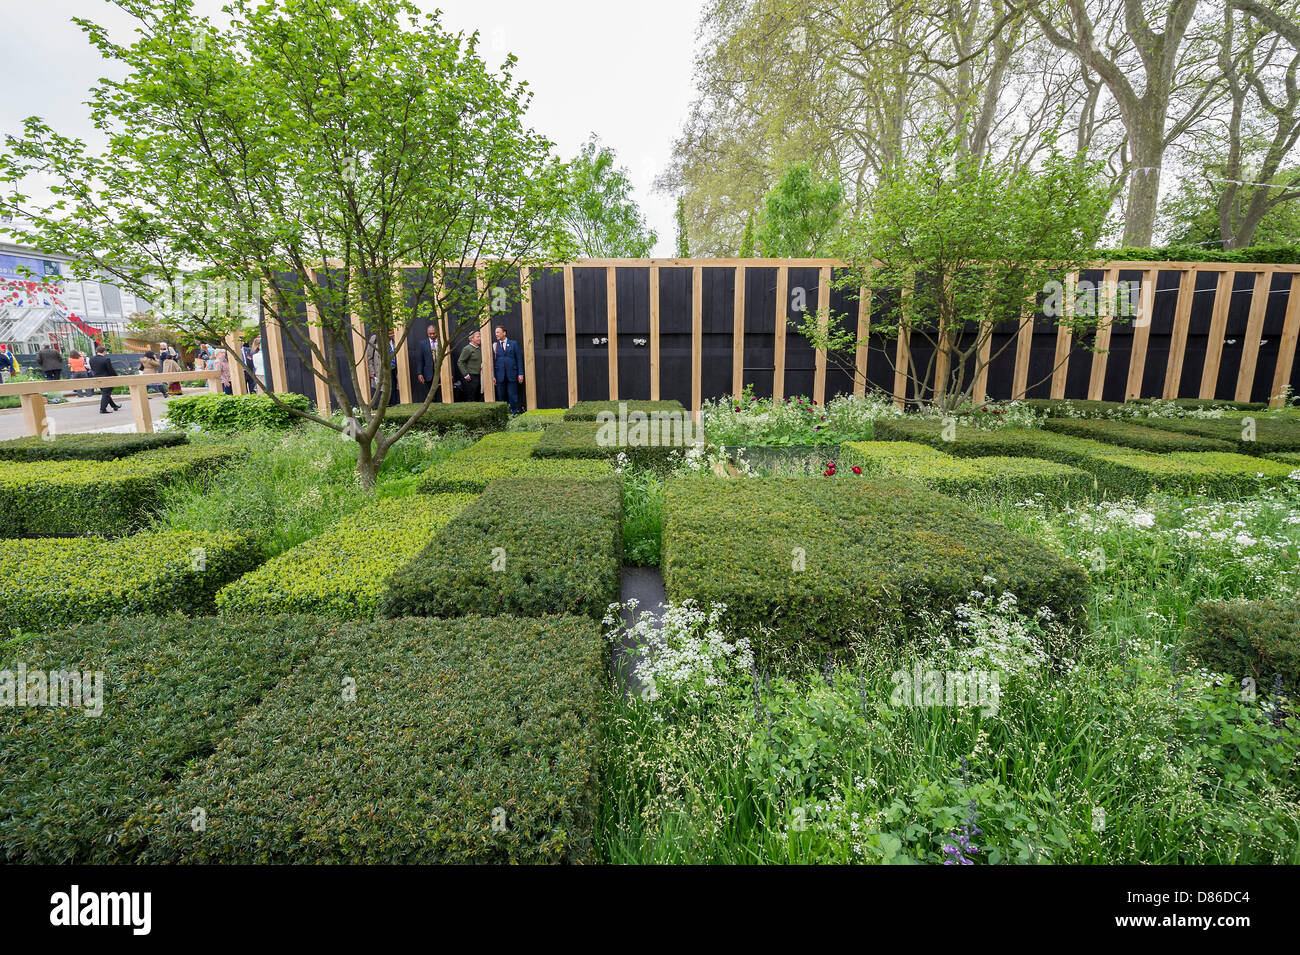 London, UK. 20th May 2013.The Daily Telegraph Garden. The first day of the Chelsea Flower Show. The Royal Hospital, Chelsea. Credit: Guy Bell/Alamy Live News Stock Photo